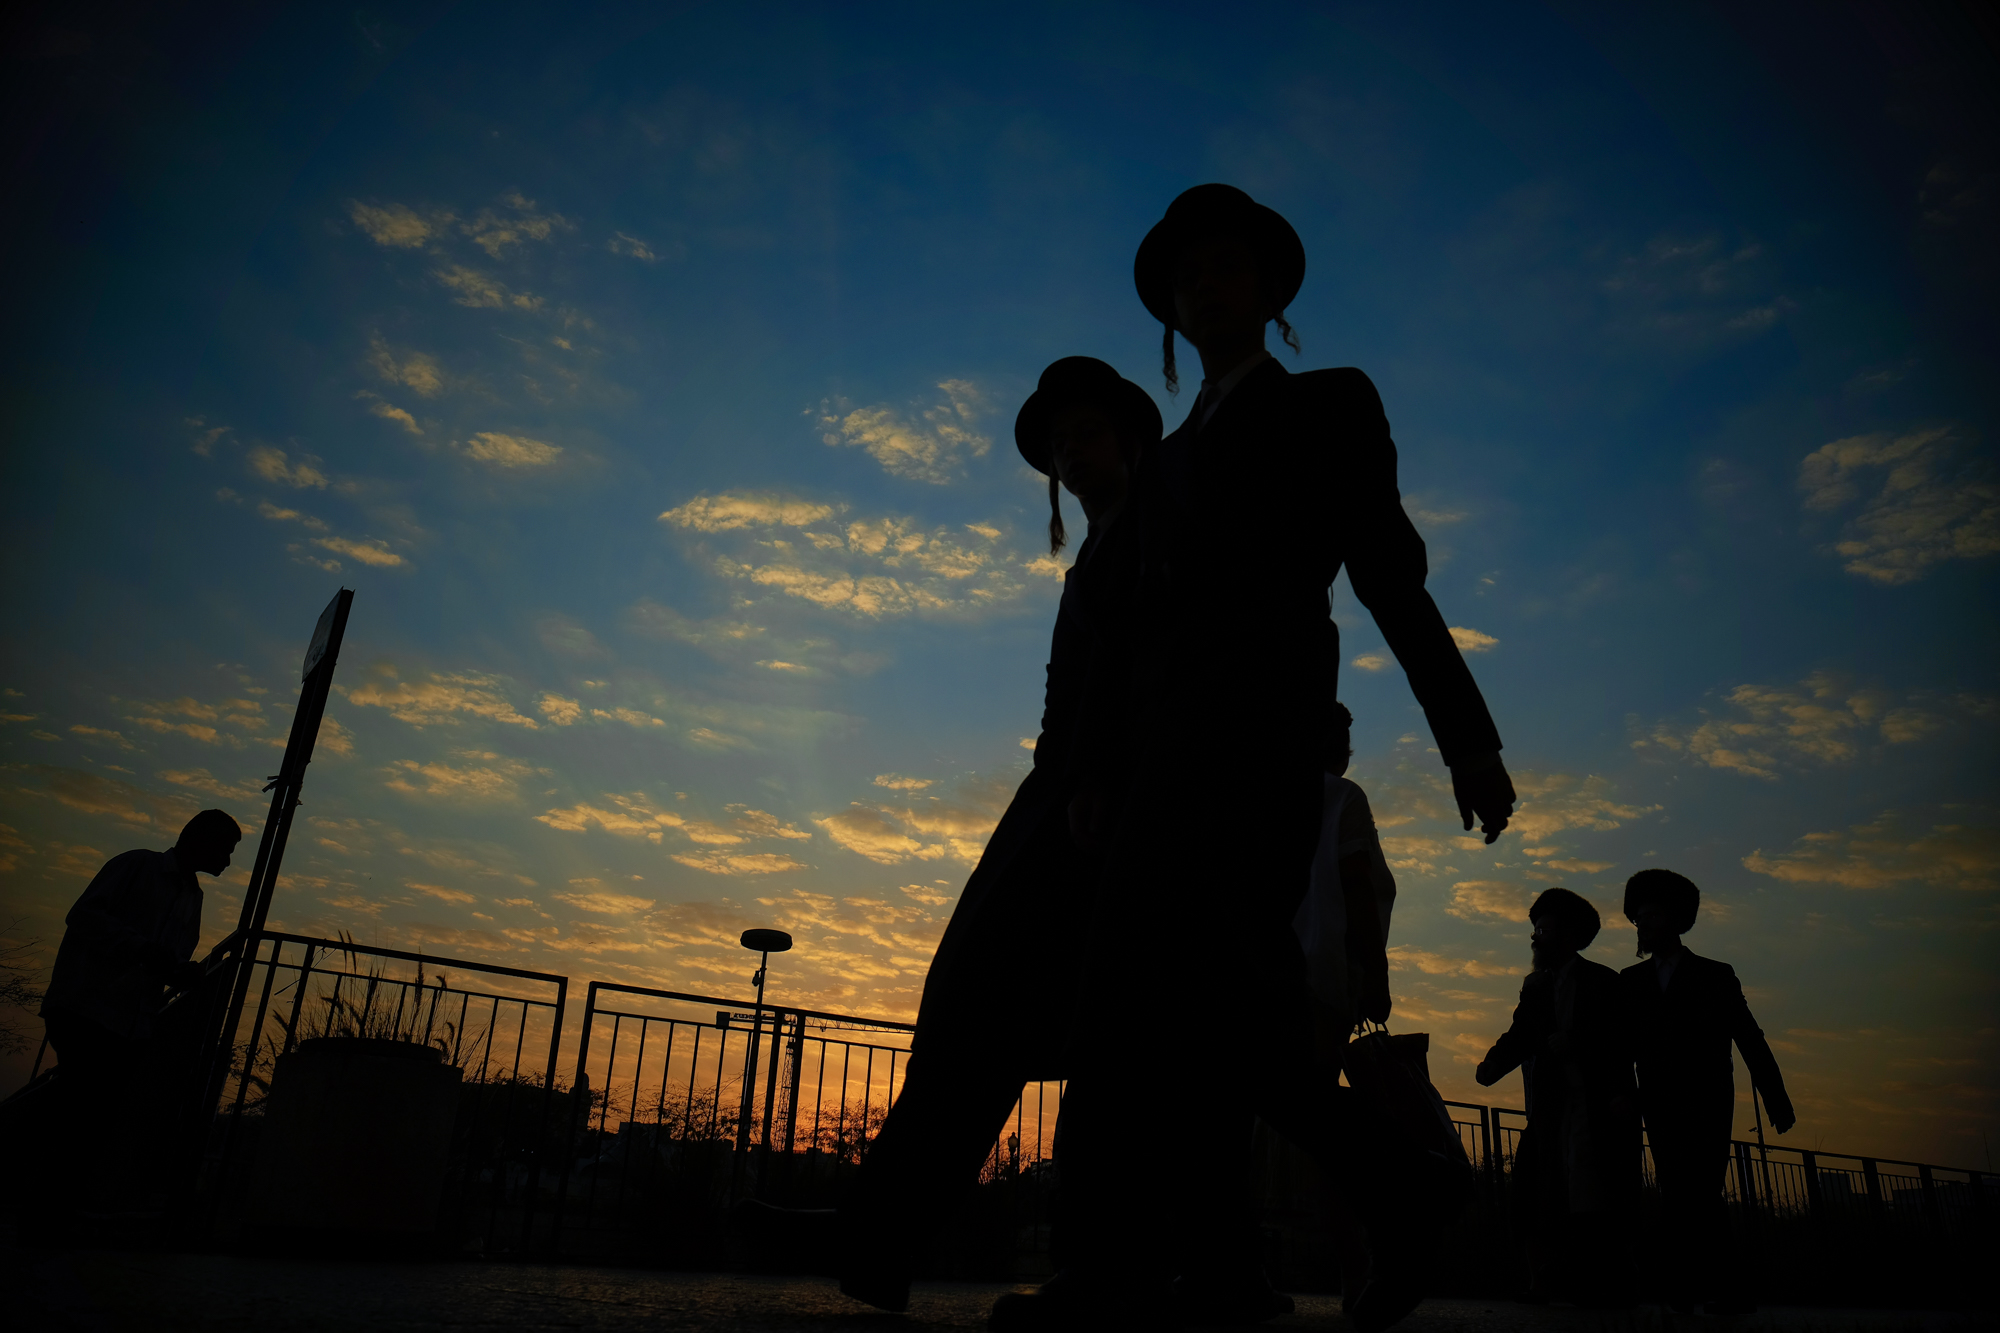 Haredi men head to the Western Wall to pray as the sun sets.